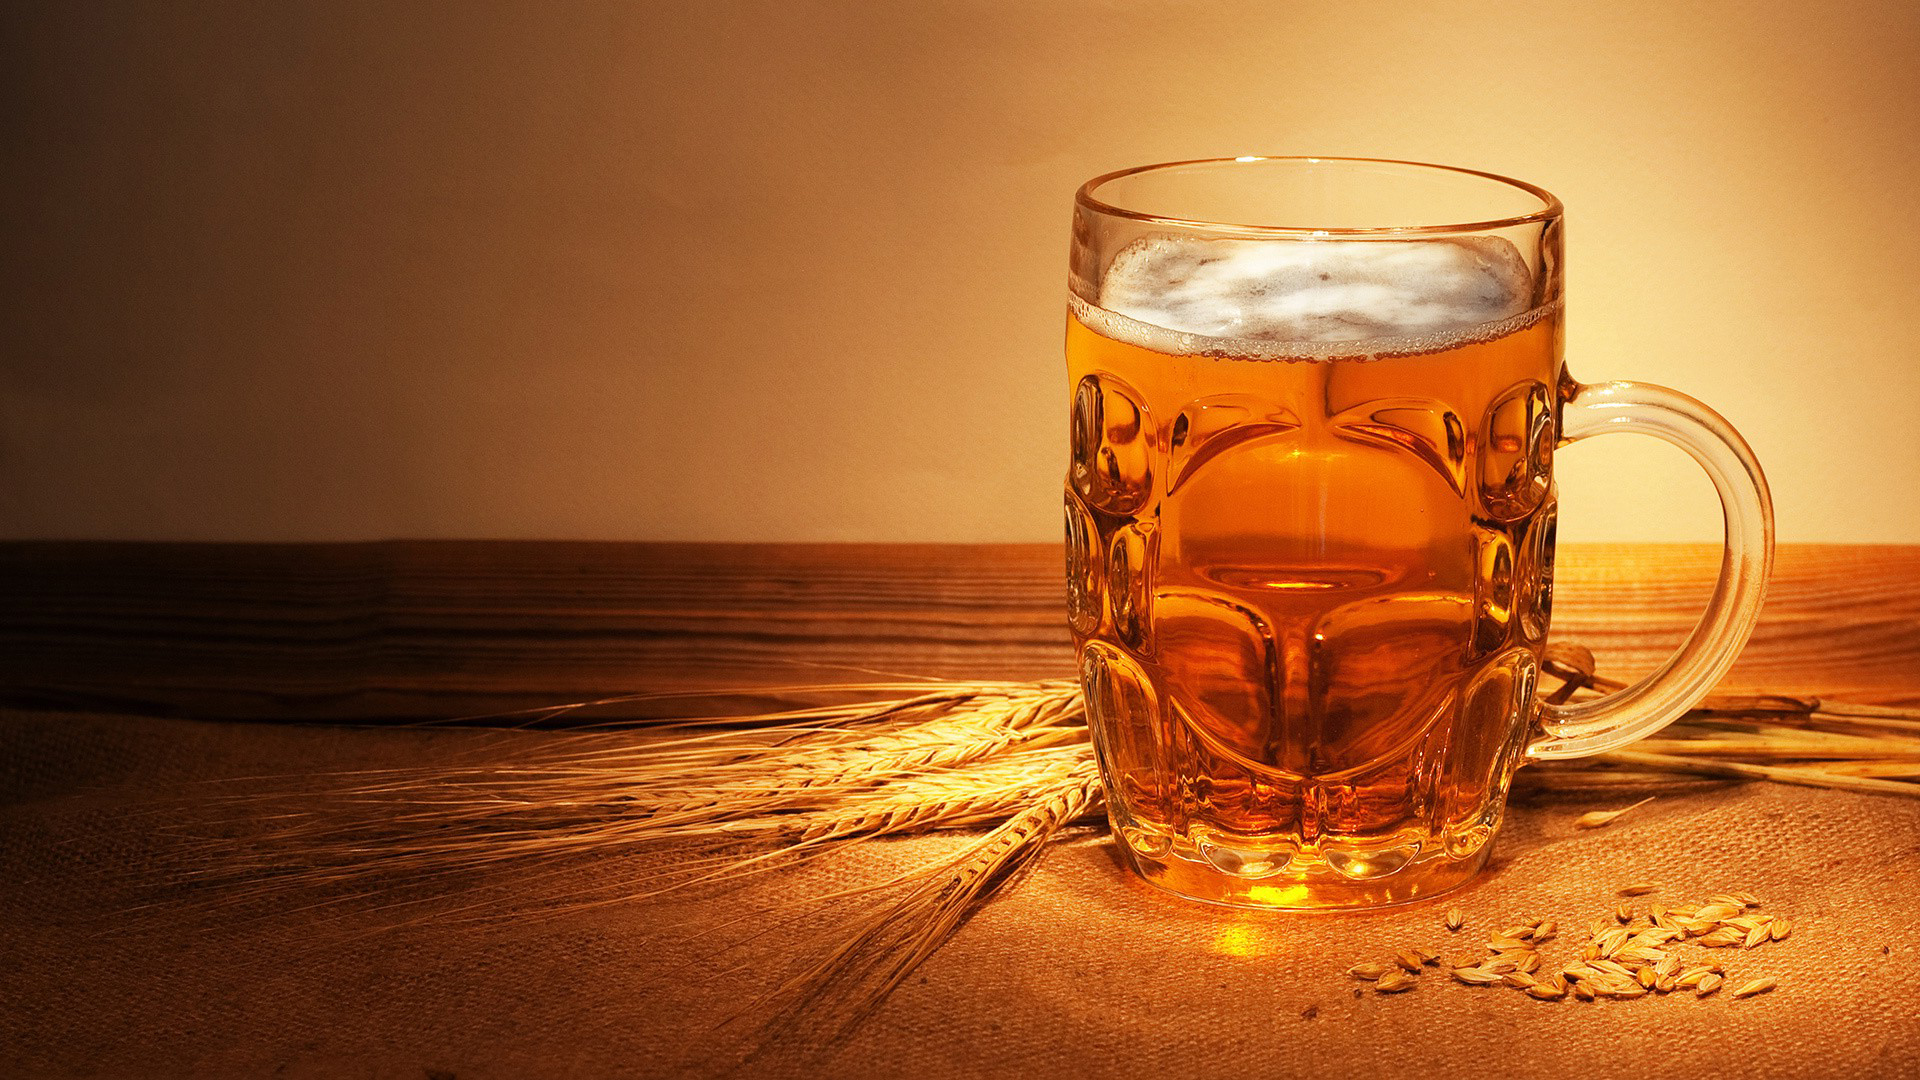 11 Mindblowing Facts You Might Not Know About Beer